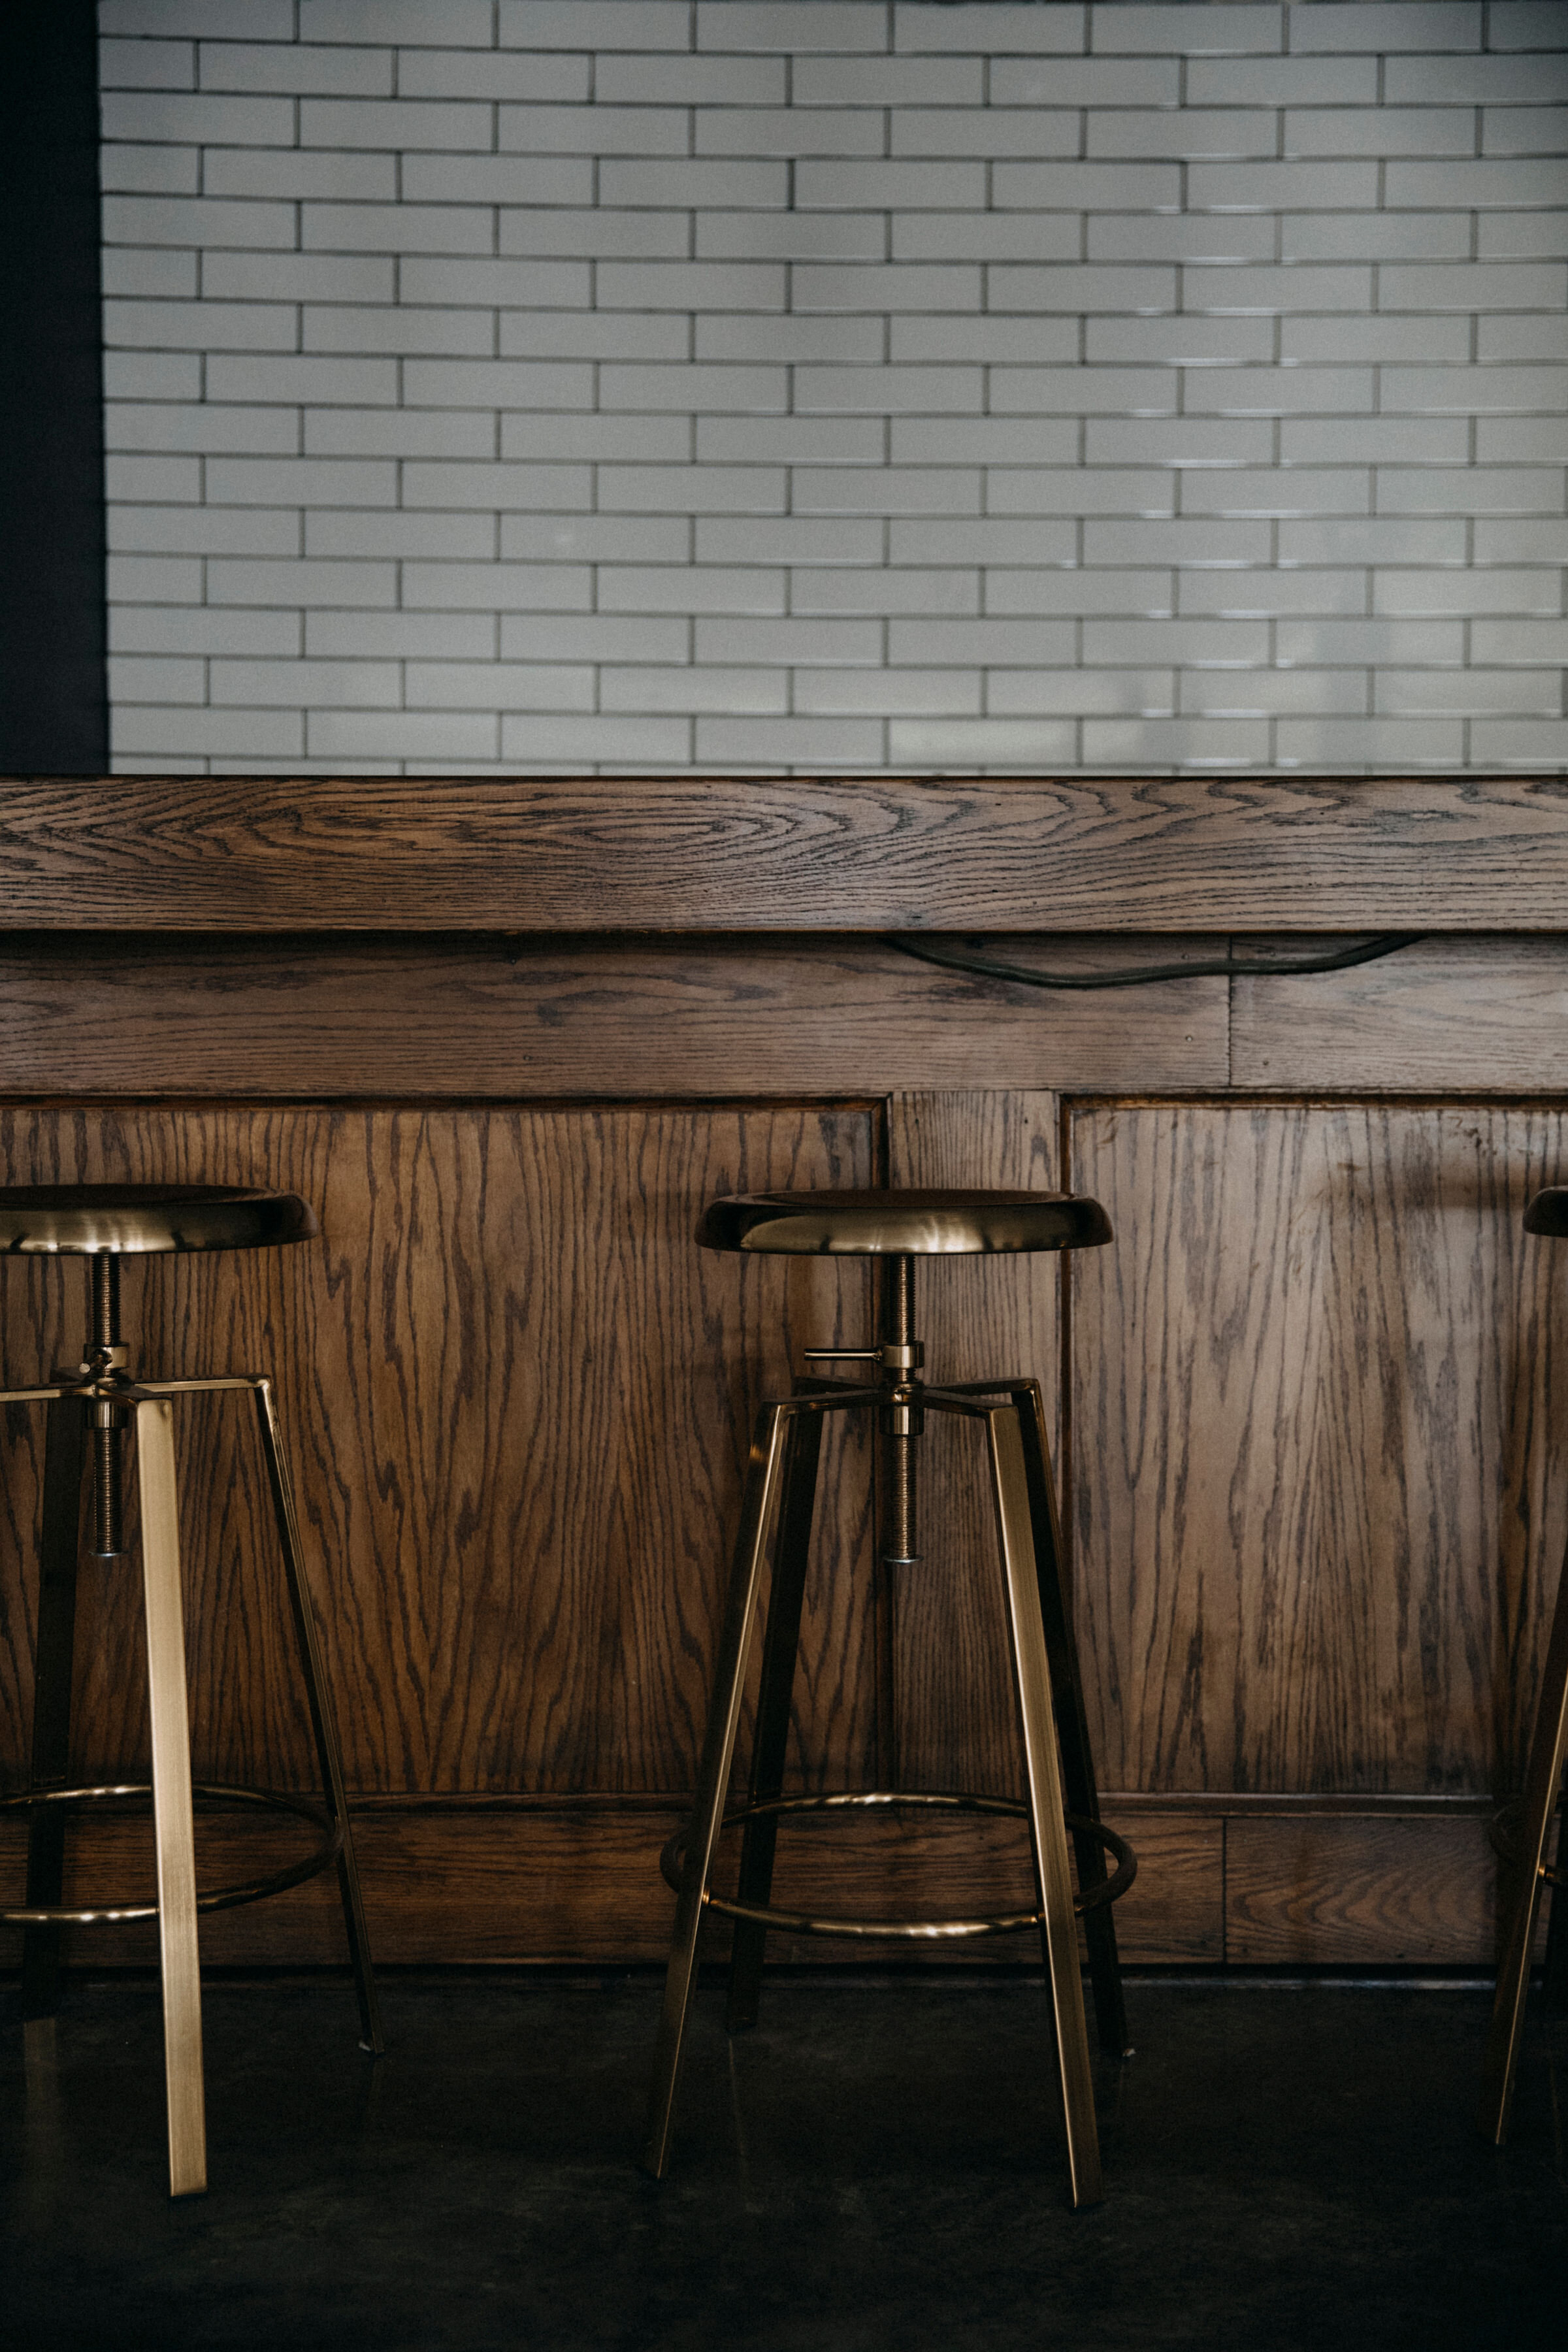 Brass barstools with white subway tile behind the bar